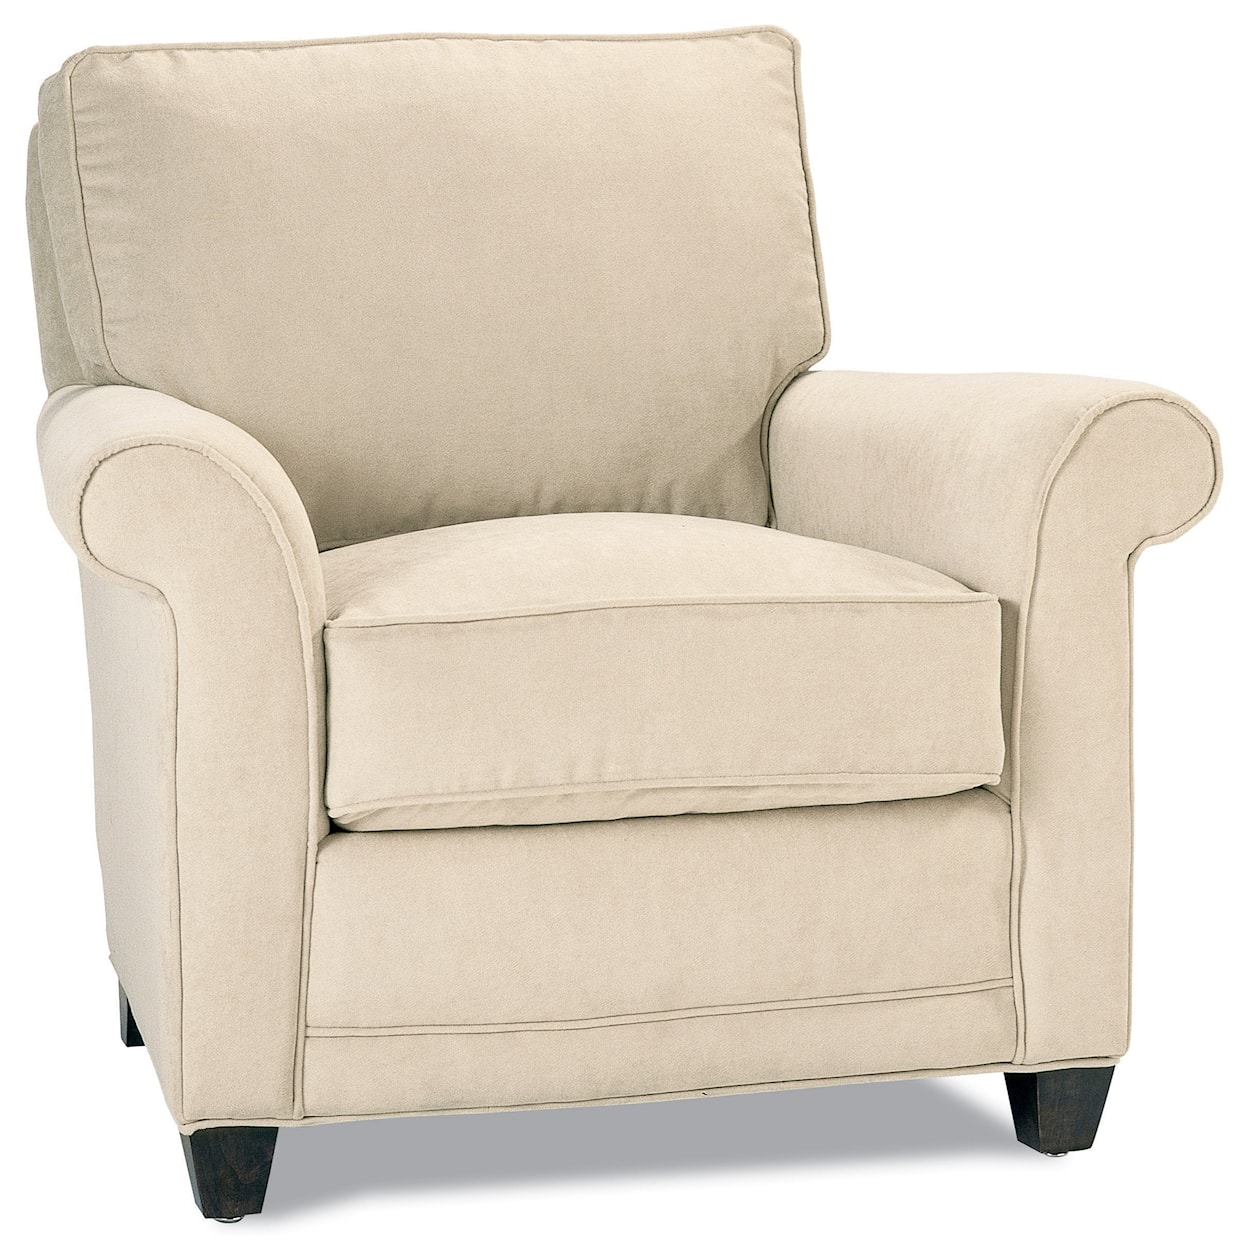 Rowe Chairs and Accents Mayflower Chair